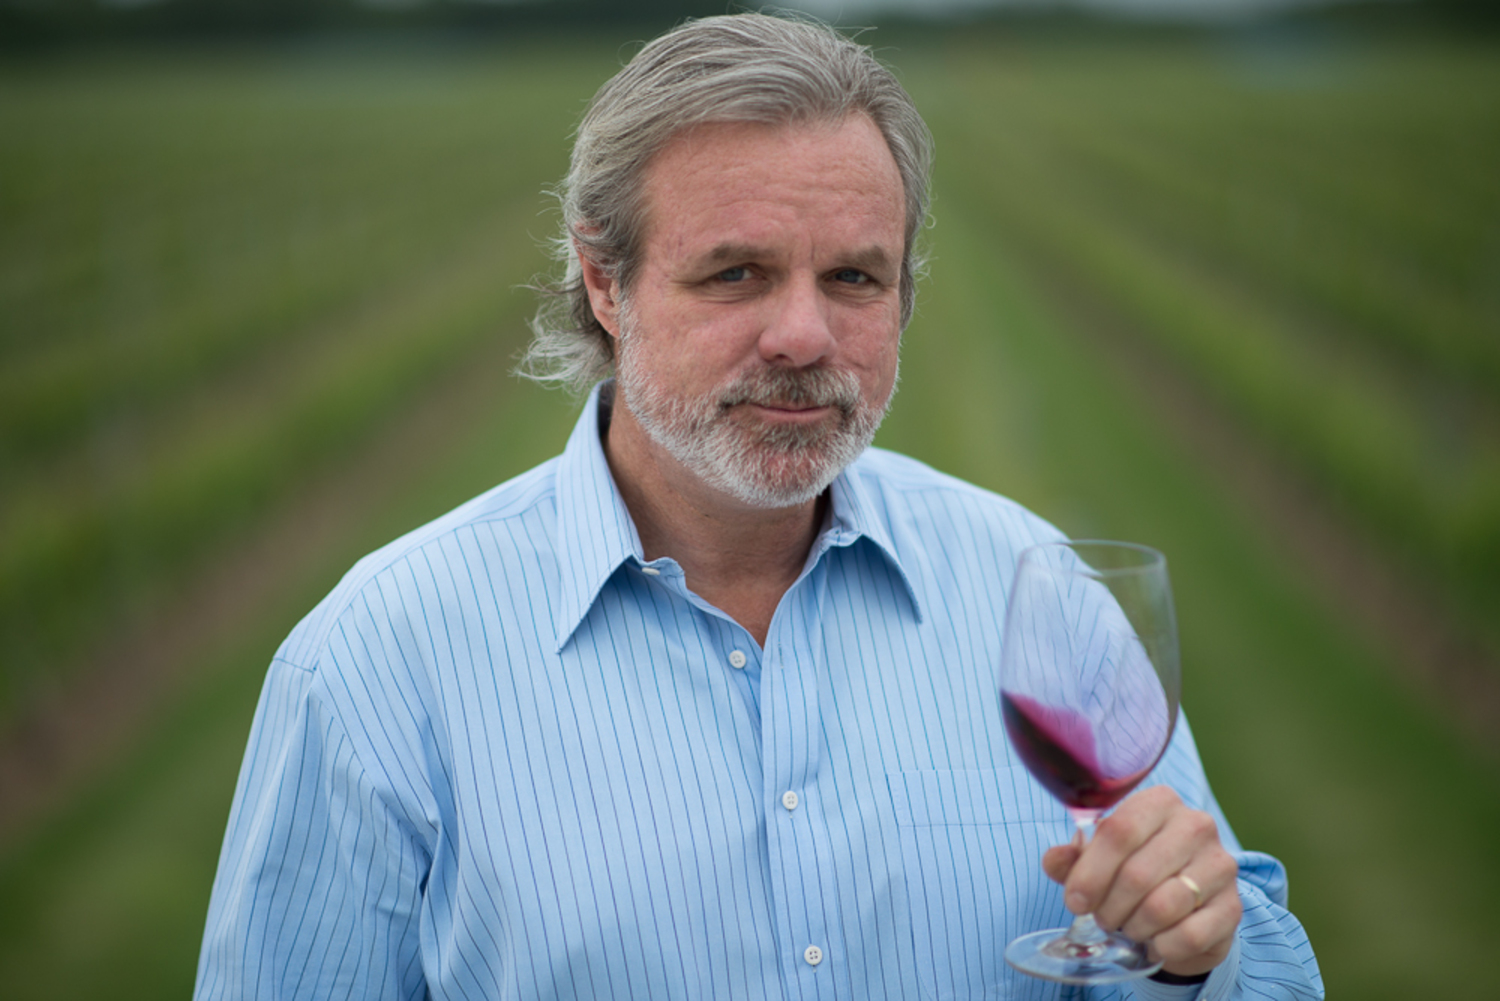 Bedell Cellars winemaker Richard Olsen-Harbich, author of “Sun, Sea, Soil, Wine: Winemaking on the North Fork of Long Island.” COURTESY BEDELL CELLARS